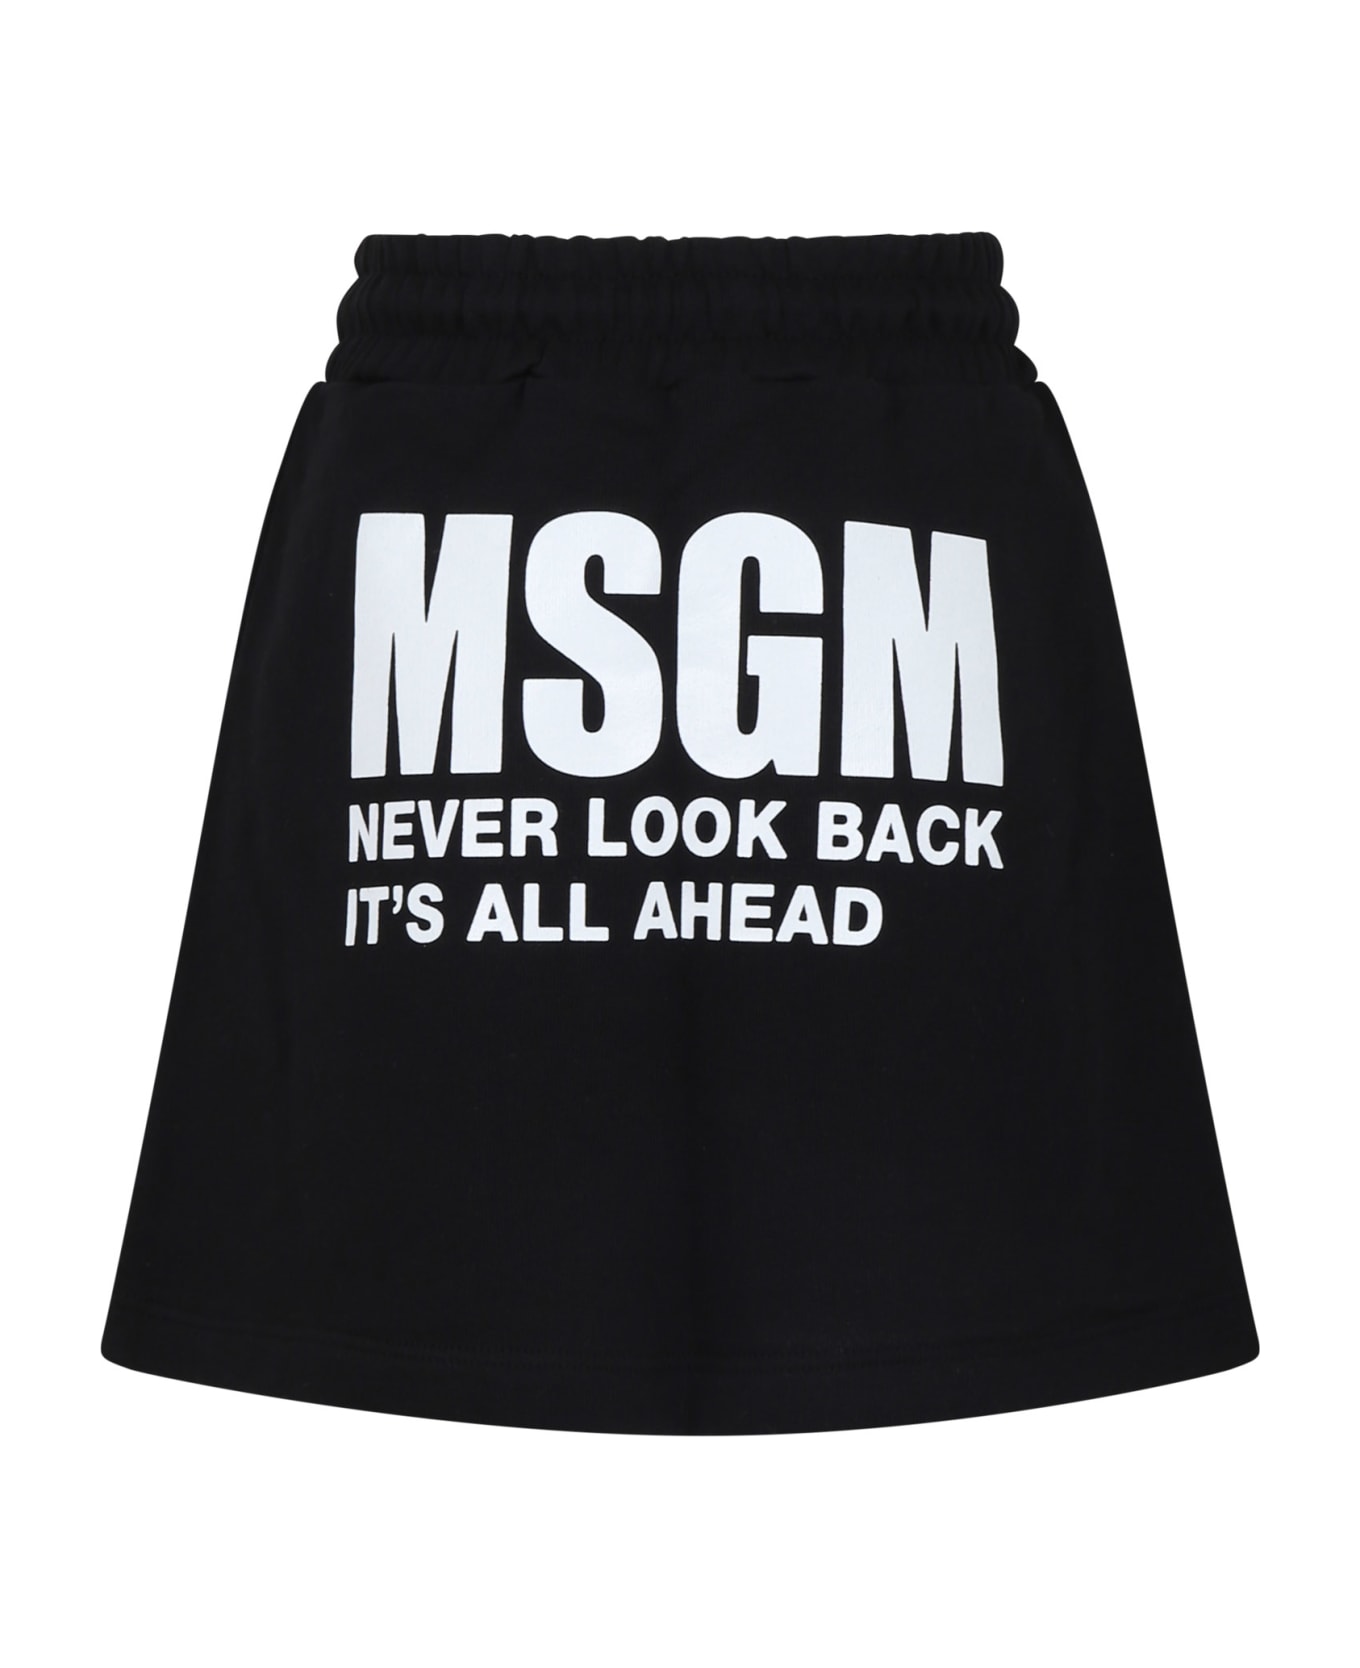 MSGM Black Skirt For Girl With Logo And Writing - Black